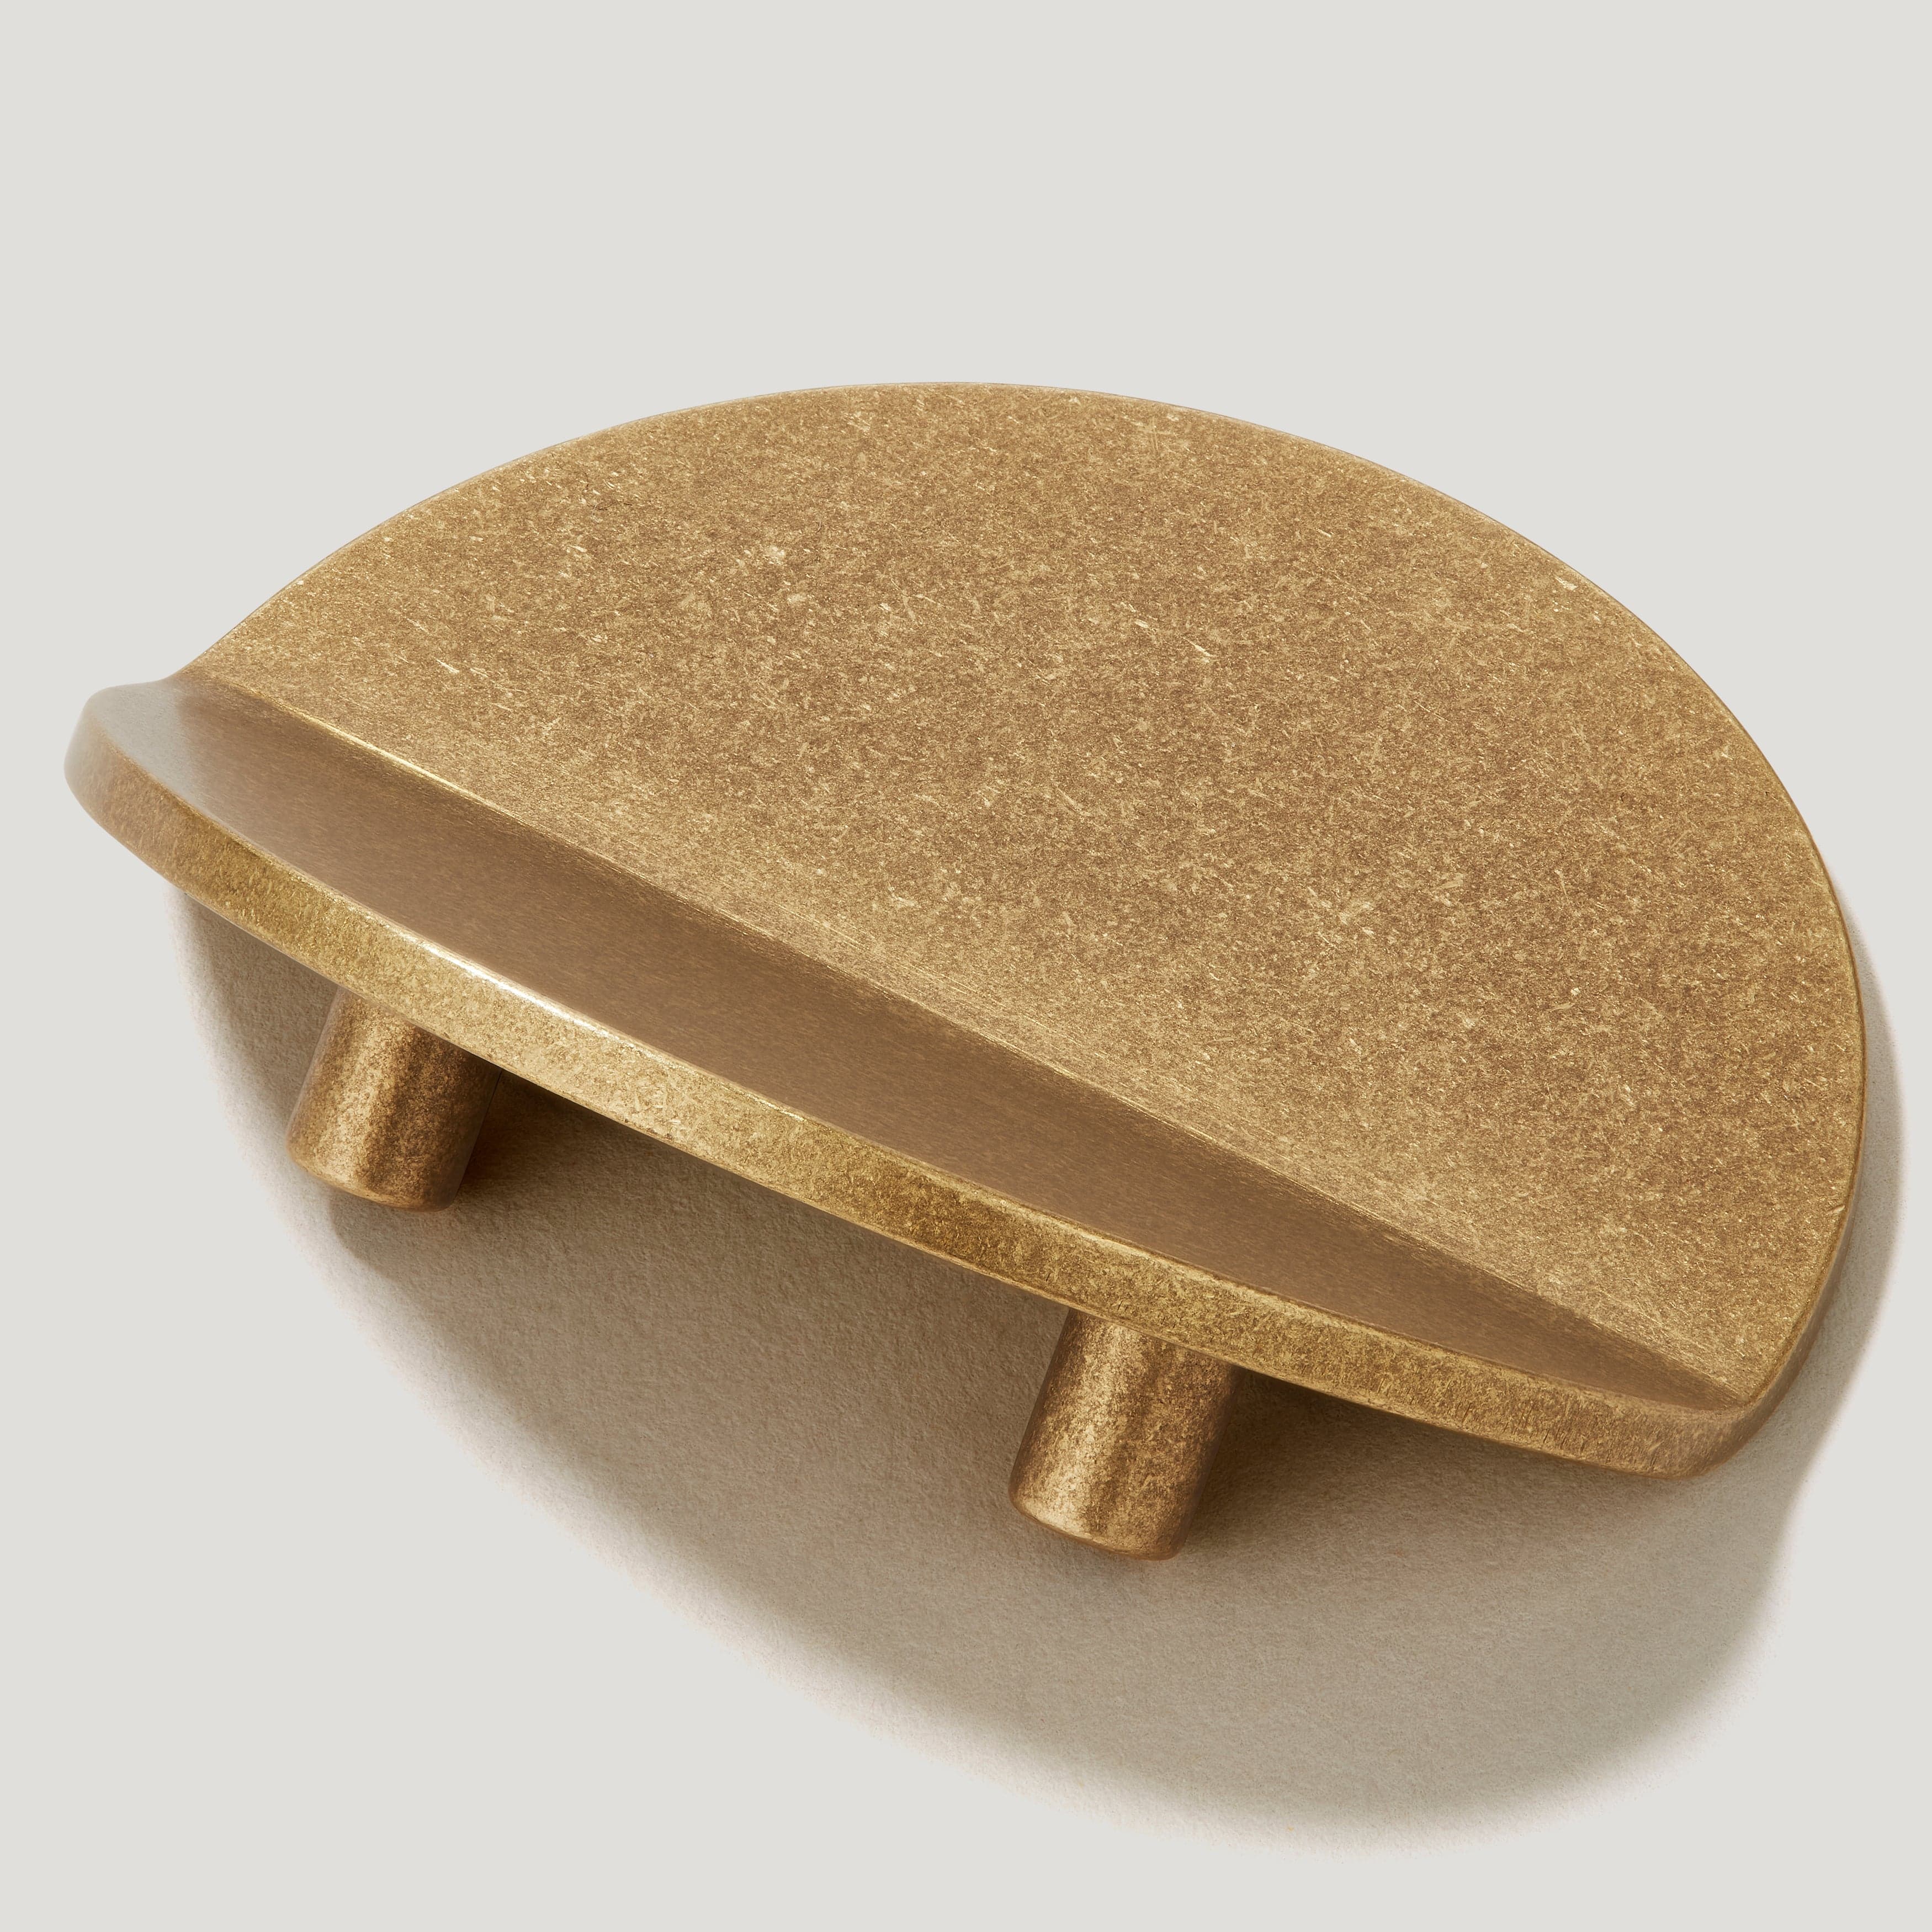 Plank Hardware Cabinetry 70mm (32mm CC) FOLD Round Front Mounted Handle - Aged Brass